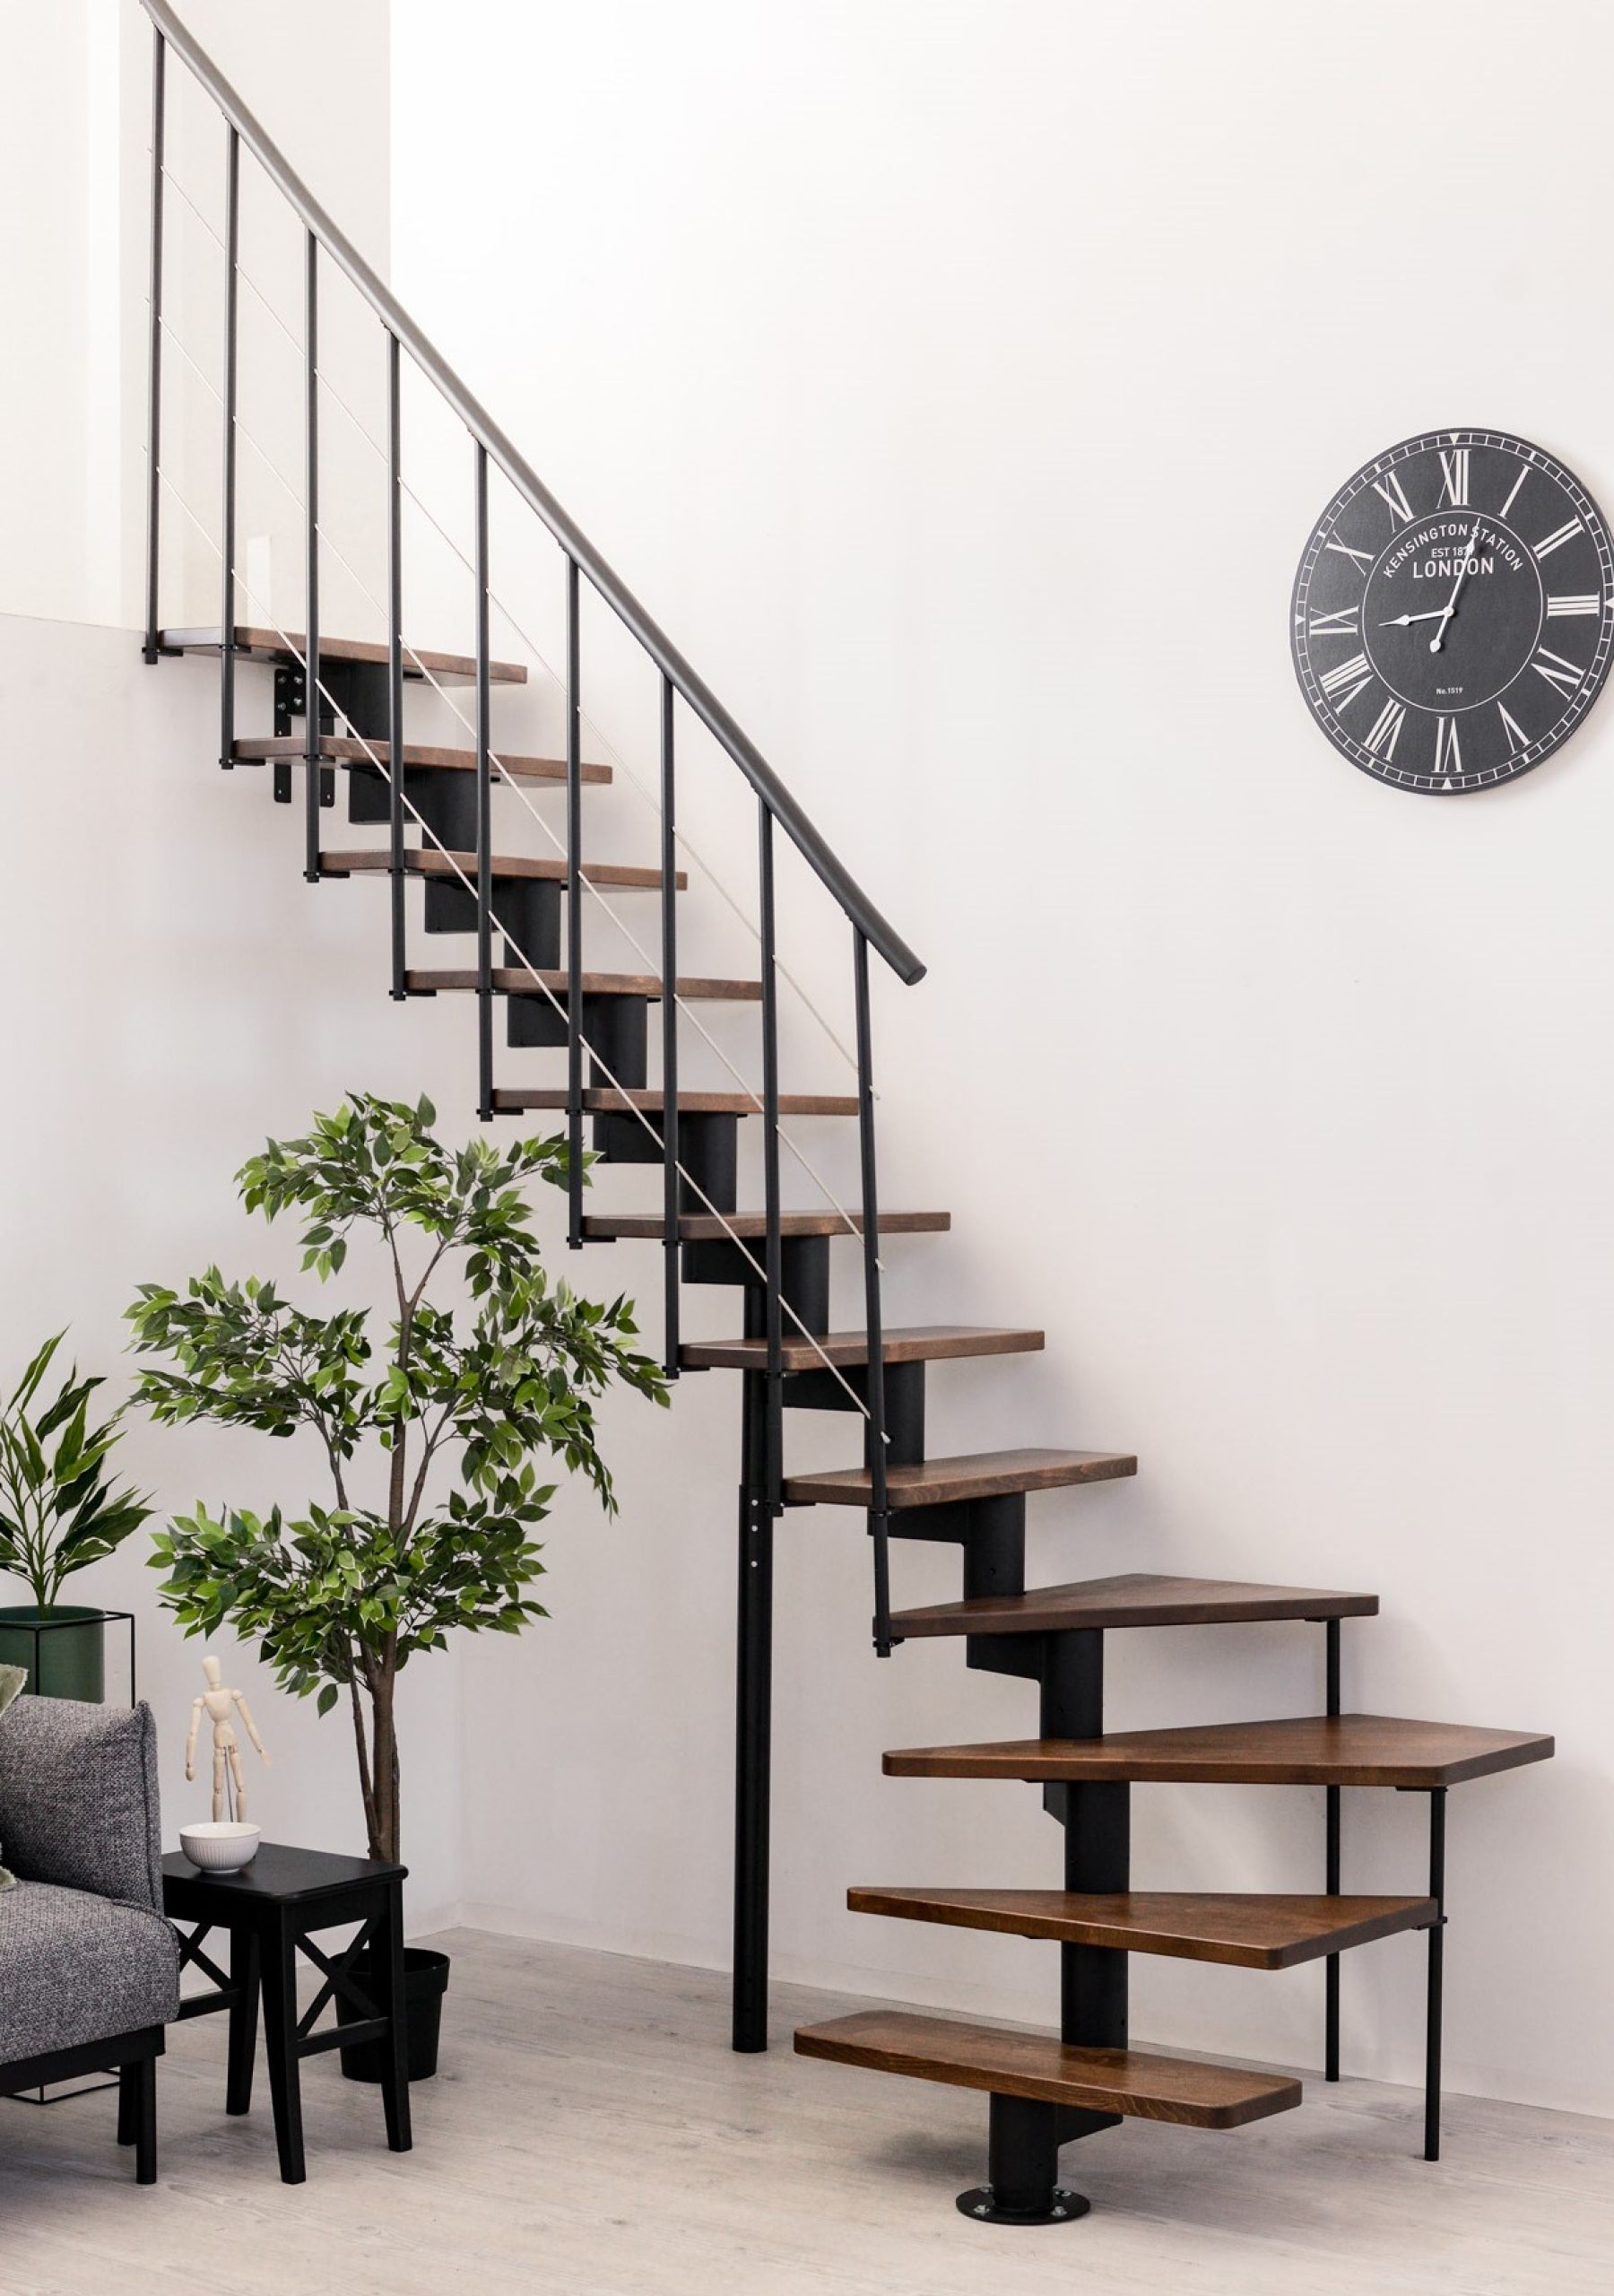 Space-saving staircases